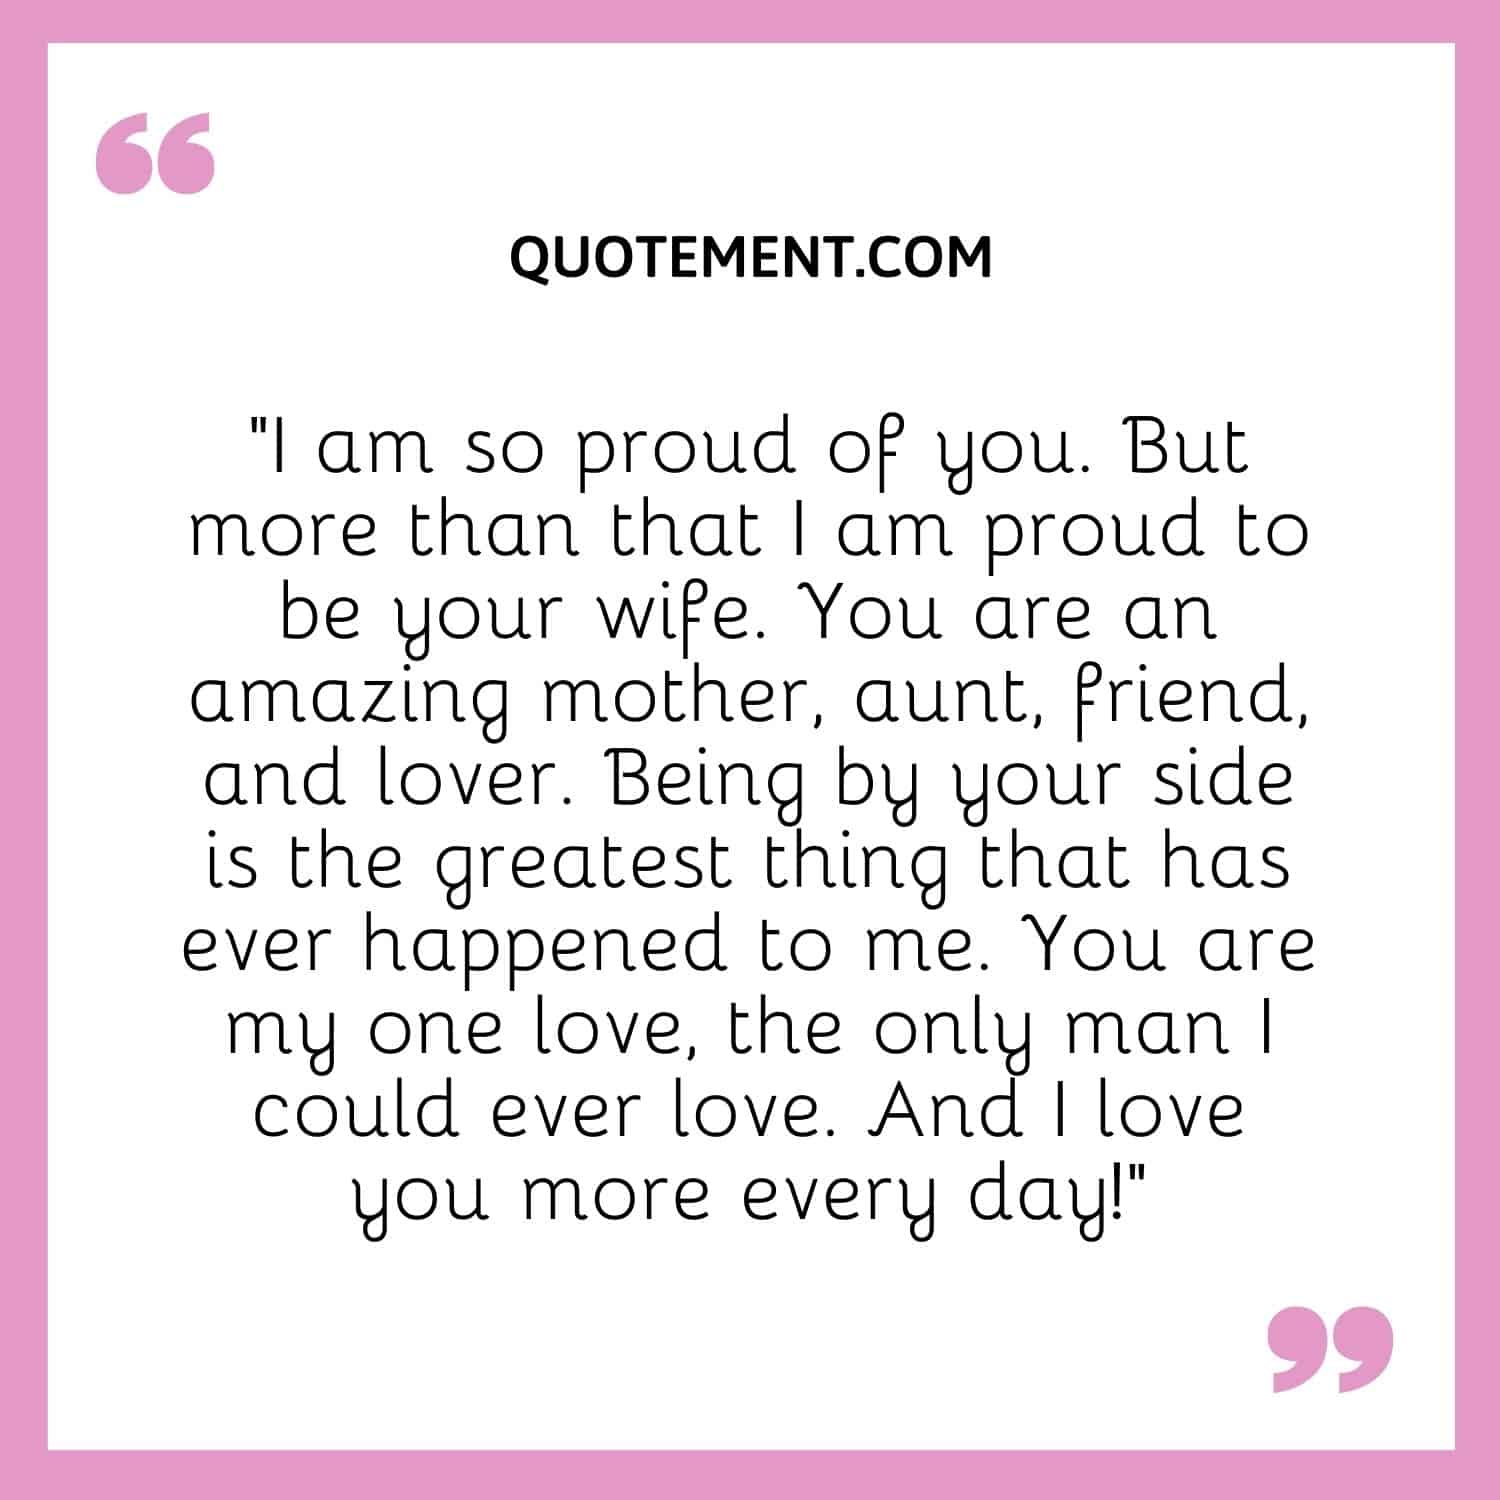 “I am so proud of you. But more than that I am proud to be your wife. You are an amazing mother, aunt, friend, and lover.